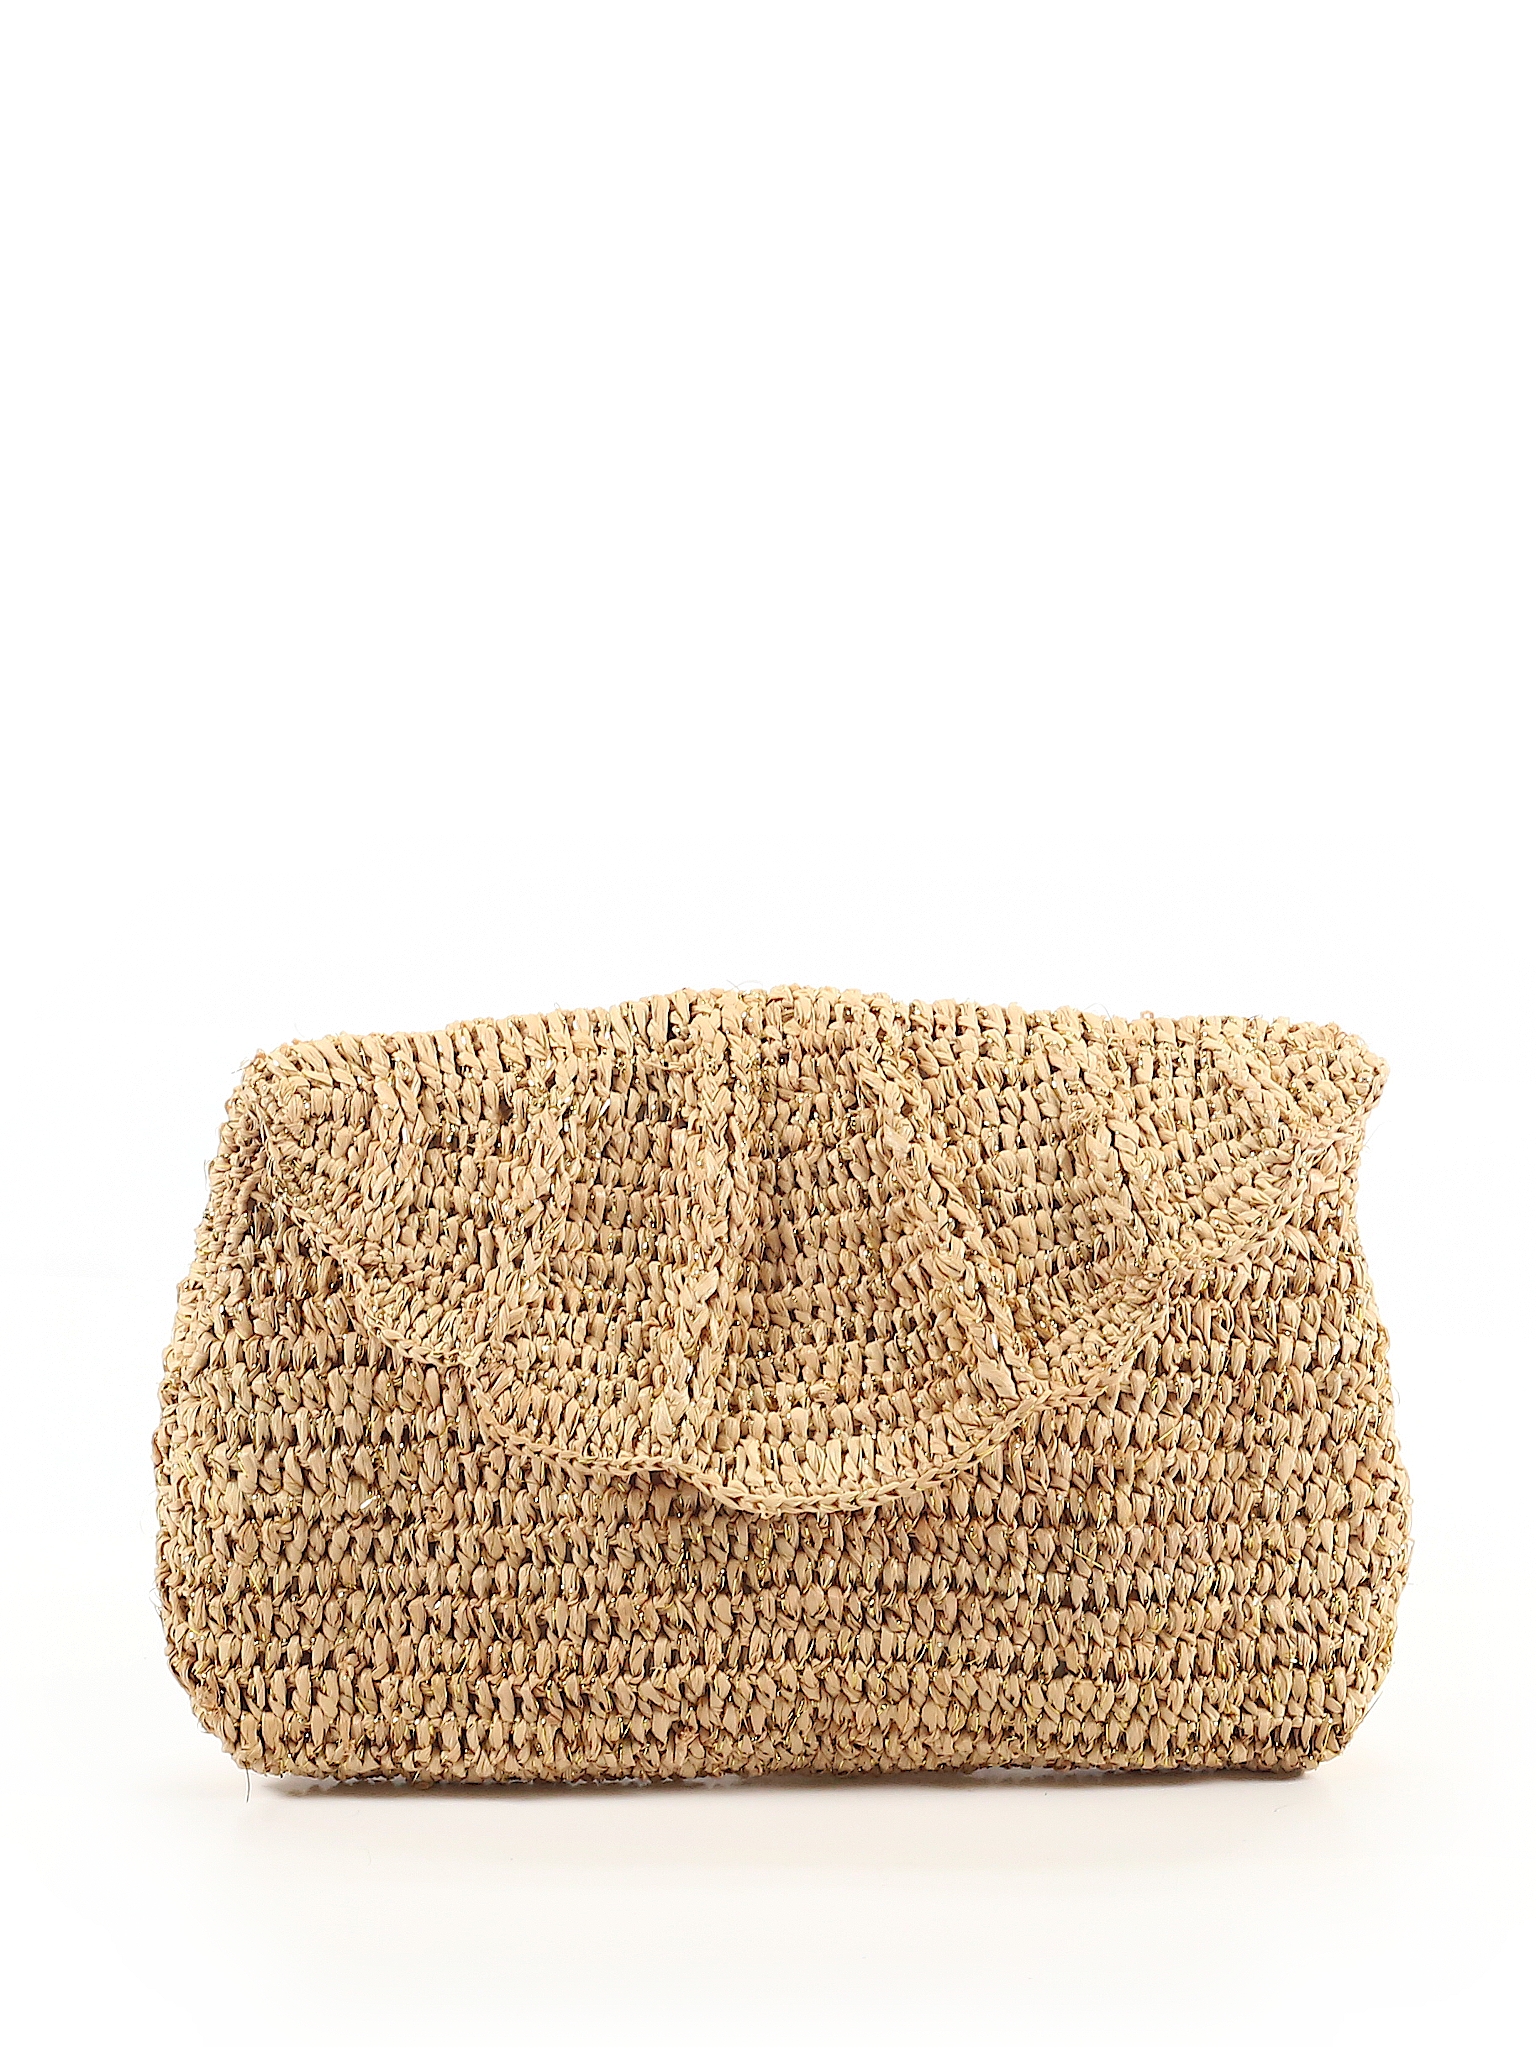 Tommy Bahama Solid Tan Clutch One Size - 60% off | thredUP